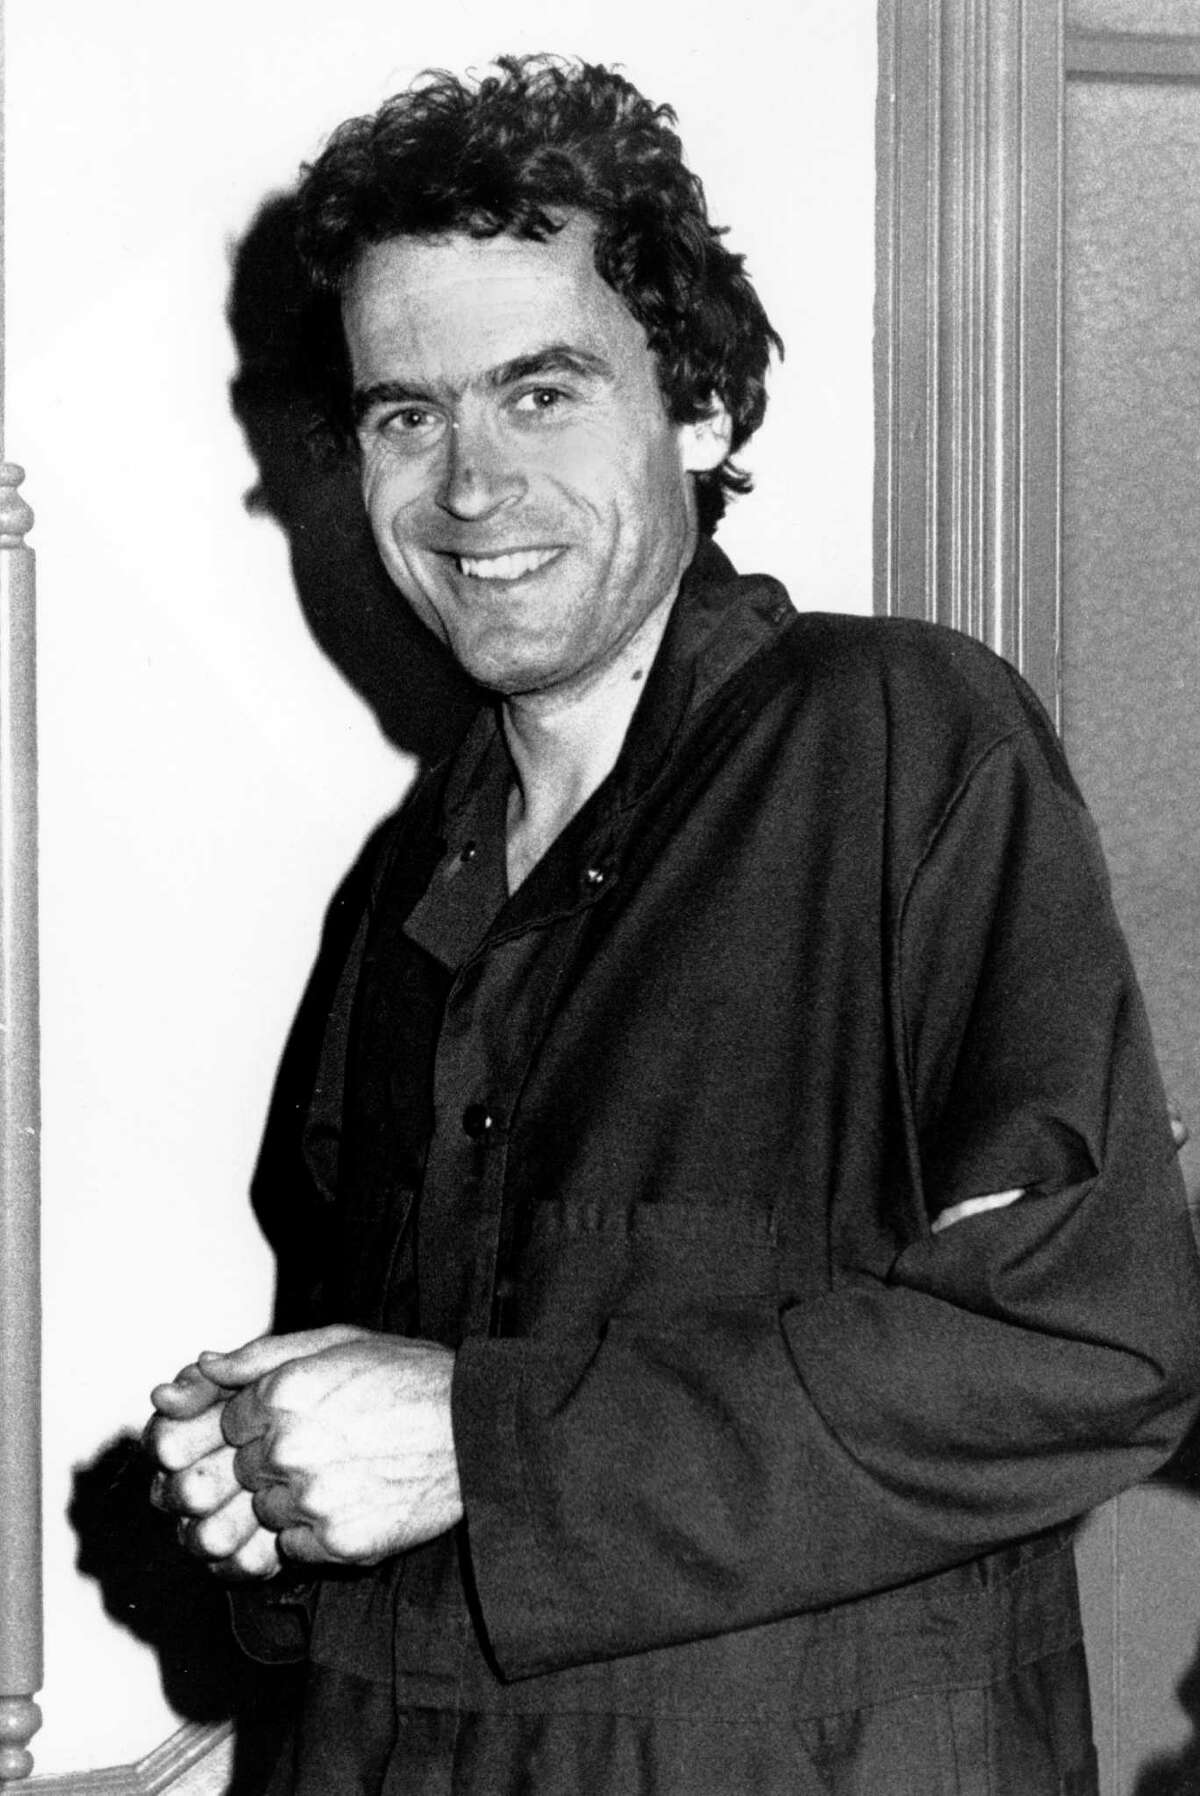 Who is Ted Bundy's daughter, Rose?